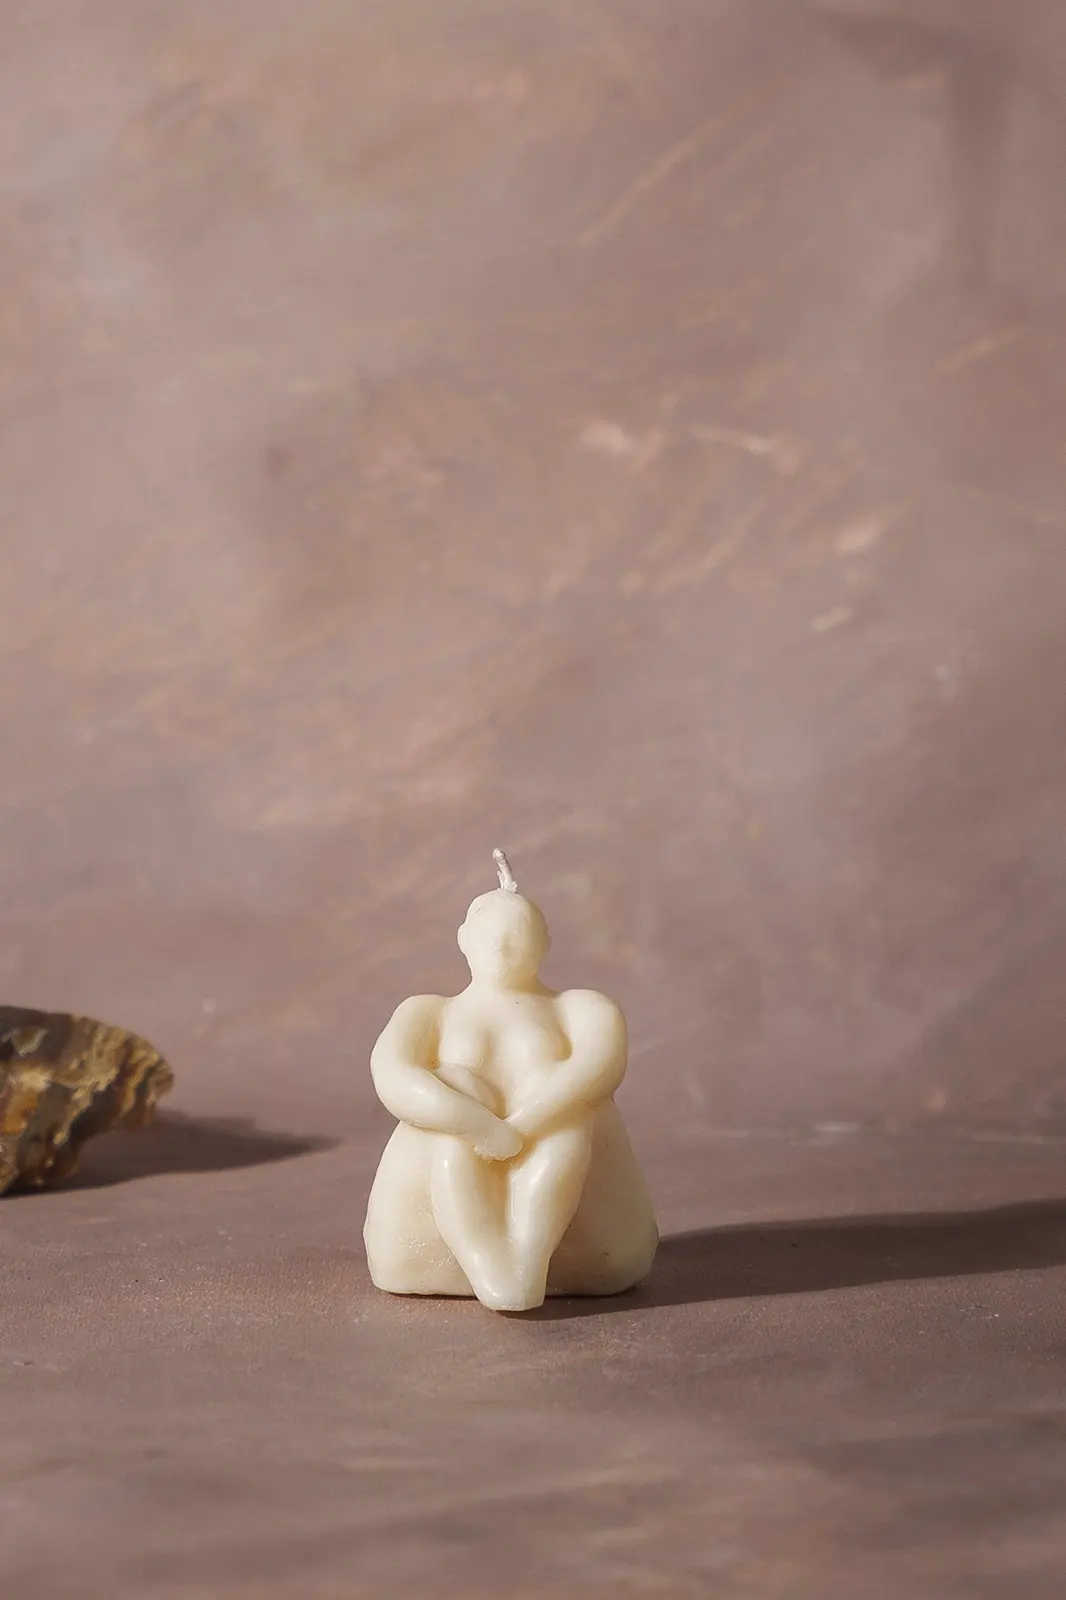 Sitting lady body positivity candle hazelnut coffee delight, coffee candle, coffee candle fragrance, fresh coffee candle, lady shape candle, soy wax candles, scented candles, coffee aroma, hazelnut candle, beeswax candle, handmade organic candles, fragrance candle, toh candles, natural scented candles, coffee scented candle, coffee fragrance, coffee aroma, Toh, sepia stories